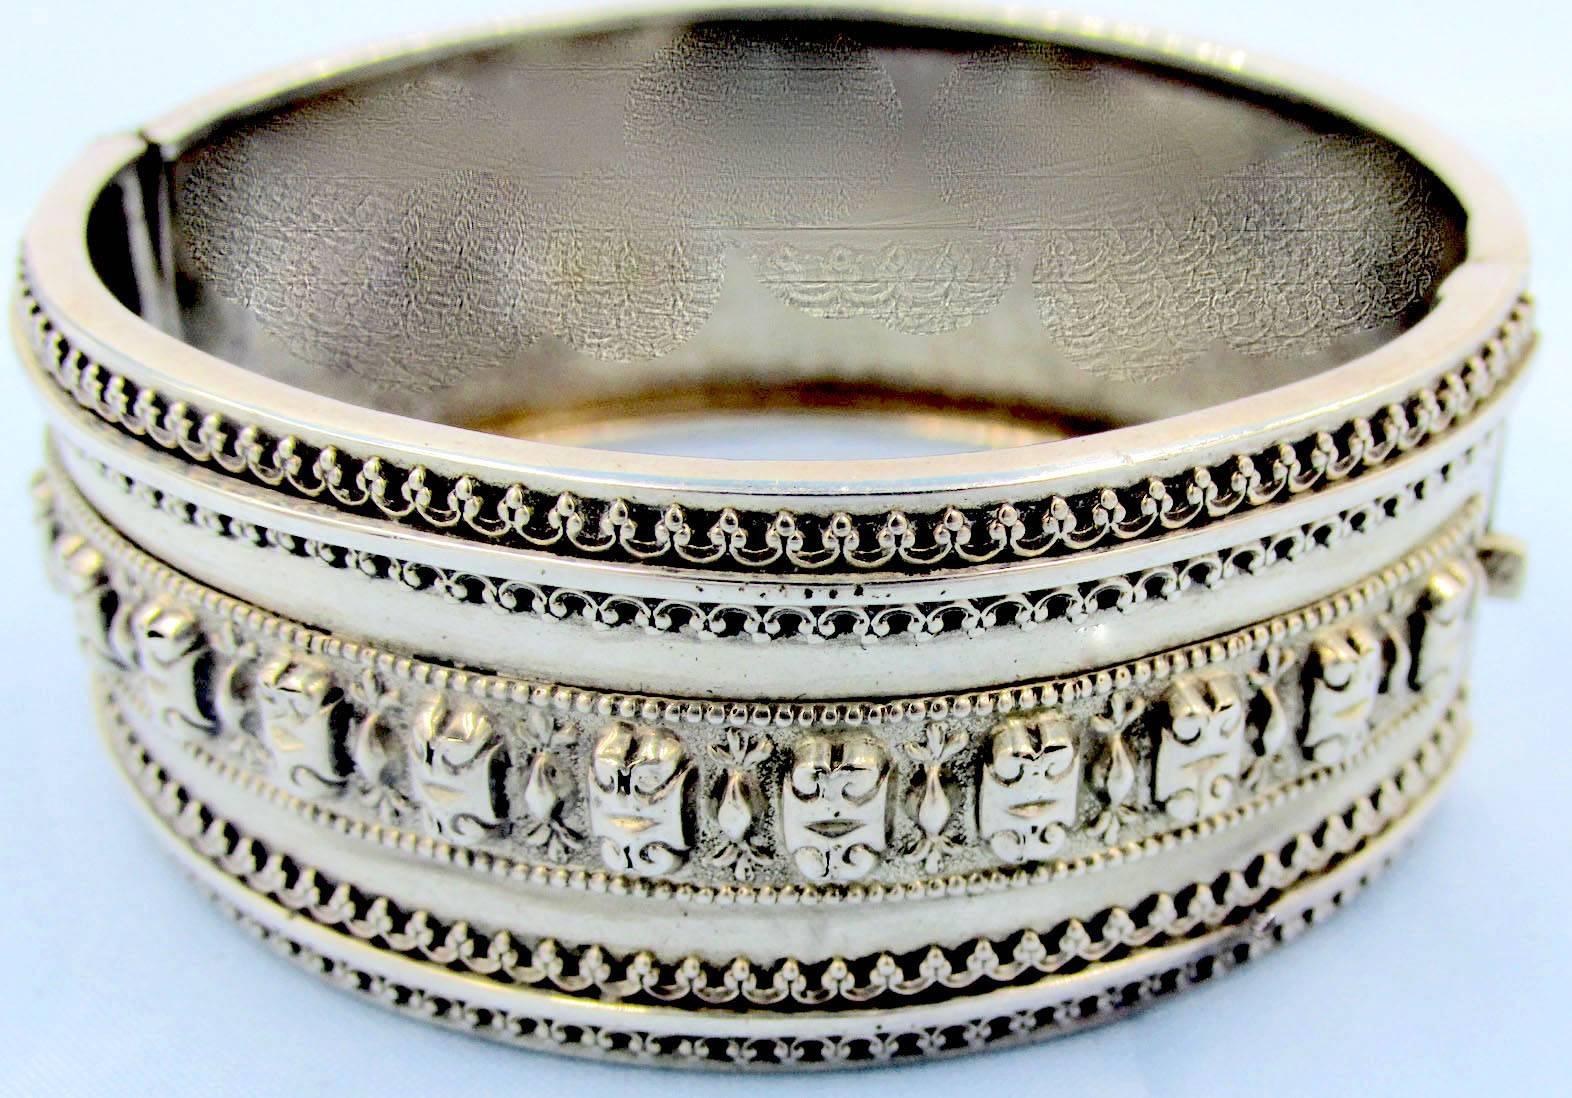 Victorian sterling cuff bracelet with an elaborate design of filigree and bead work. The bracelet is hallmarked Birmingham 1885 and measures 1" wide and has an interior measurement of 2" by 2 1/4". Wonderful to wear alone or paired